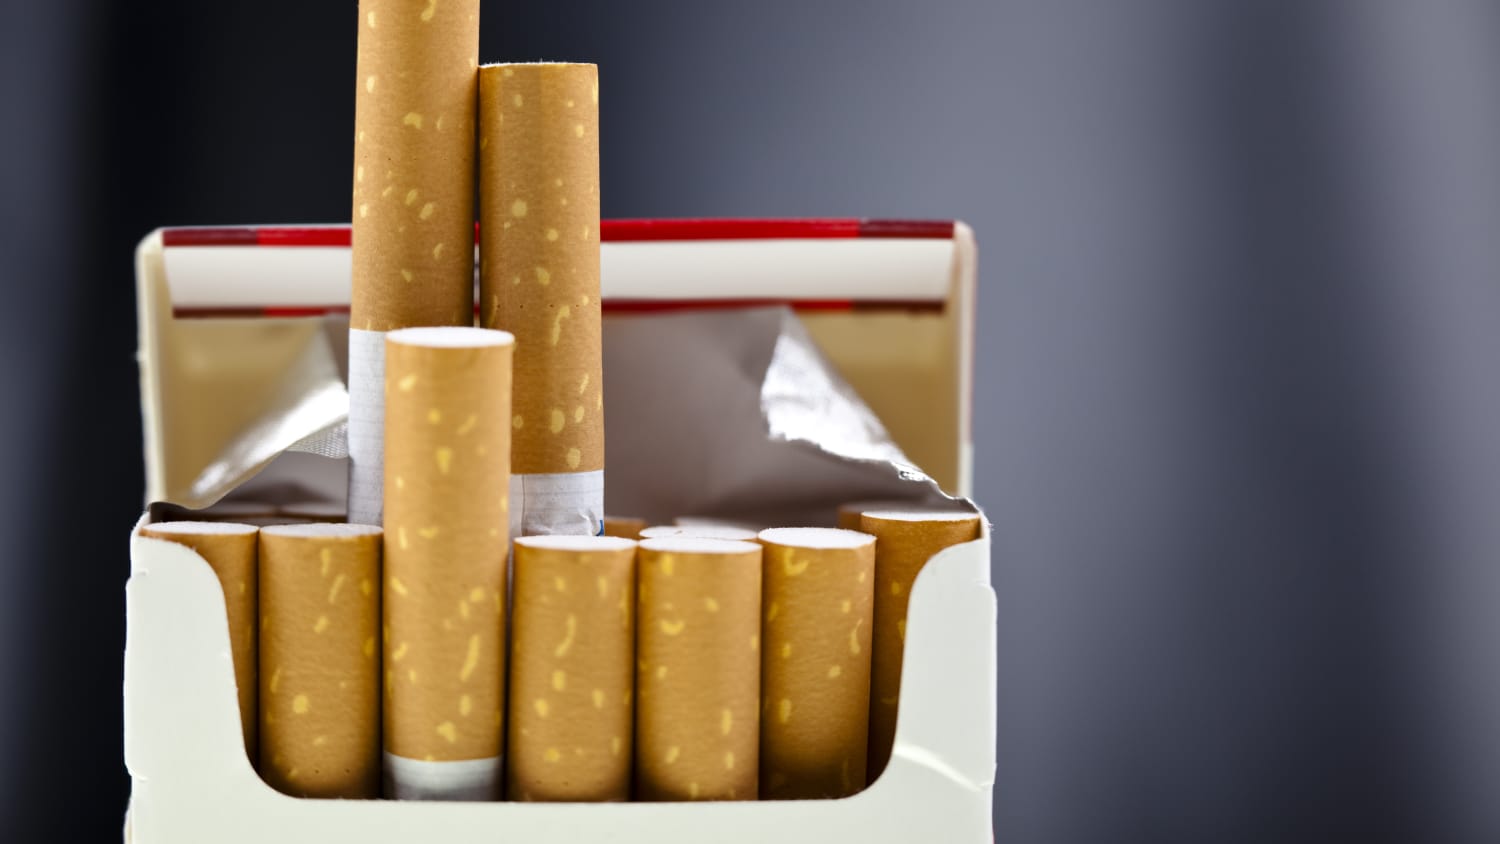 Are Reduced-Nicotine Cigarettes Coming? > News > Yale Medicine